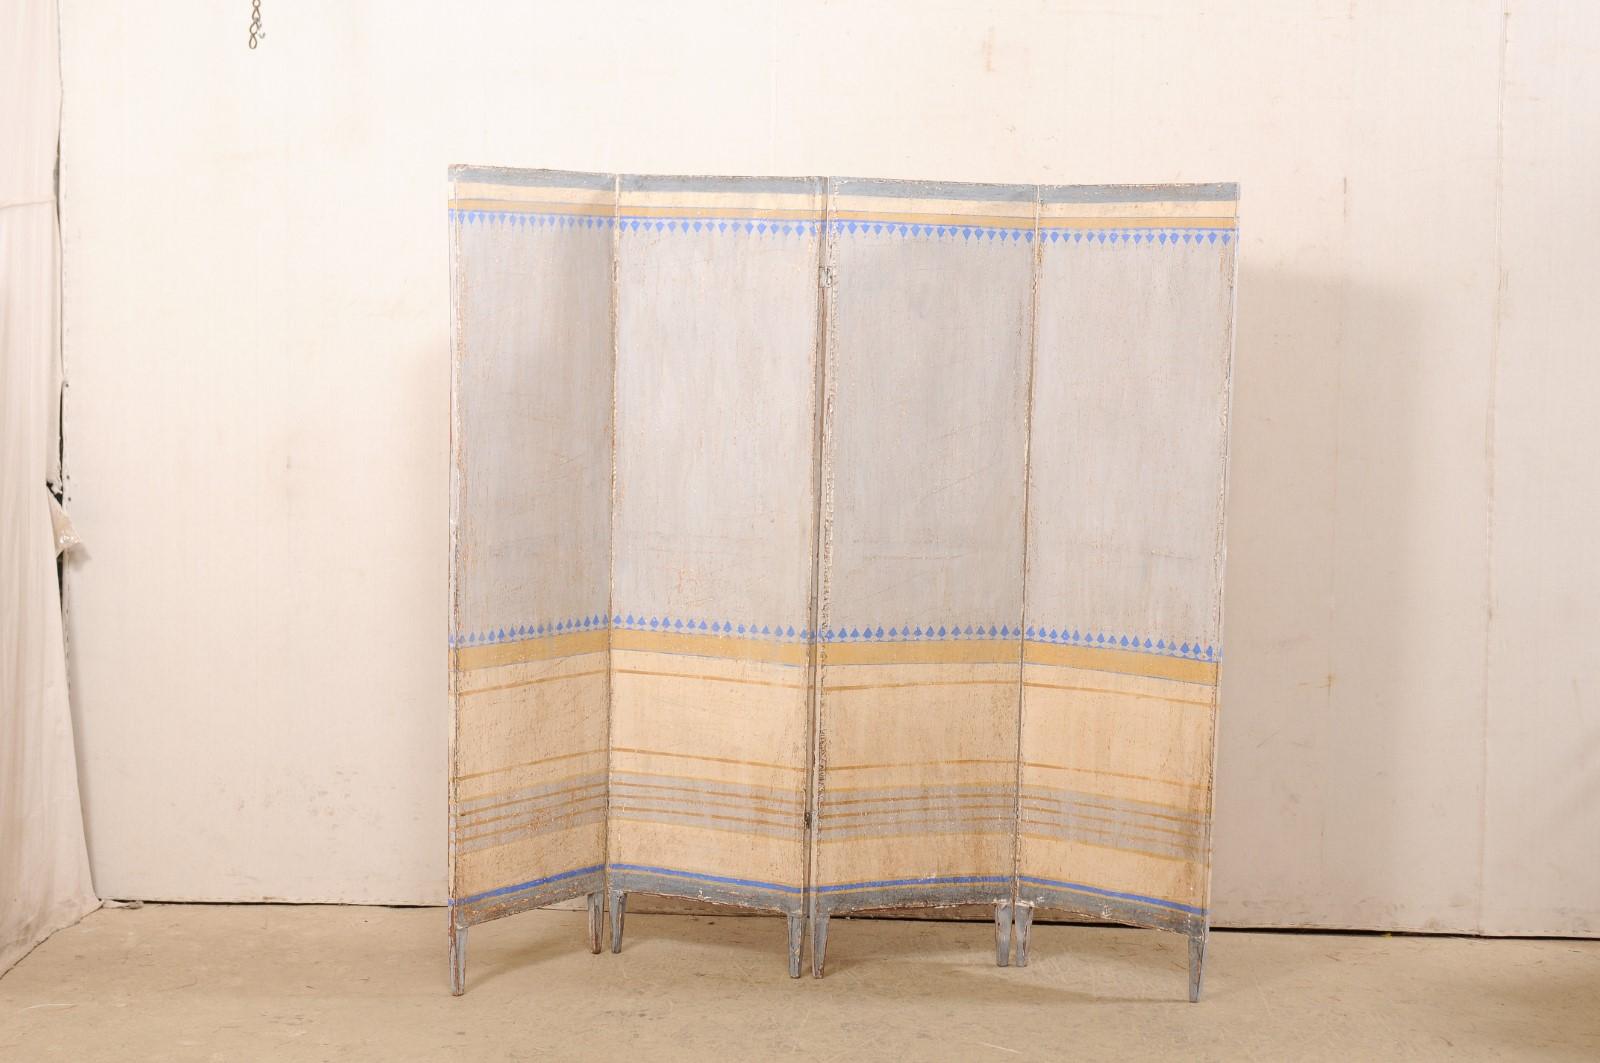 An Italian hand-painted folding screen or room divider. This vintage accordion style folding screen from Italy features four tall sections, connected with hinges, giving this piece a height just over 6 feet, and approximately 6.5 feet wide when